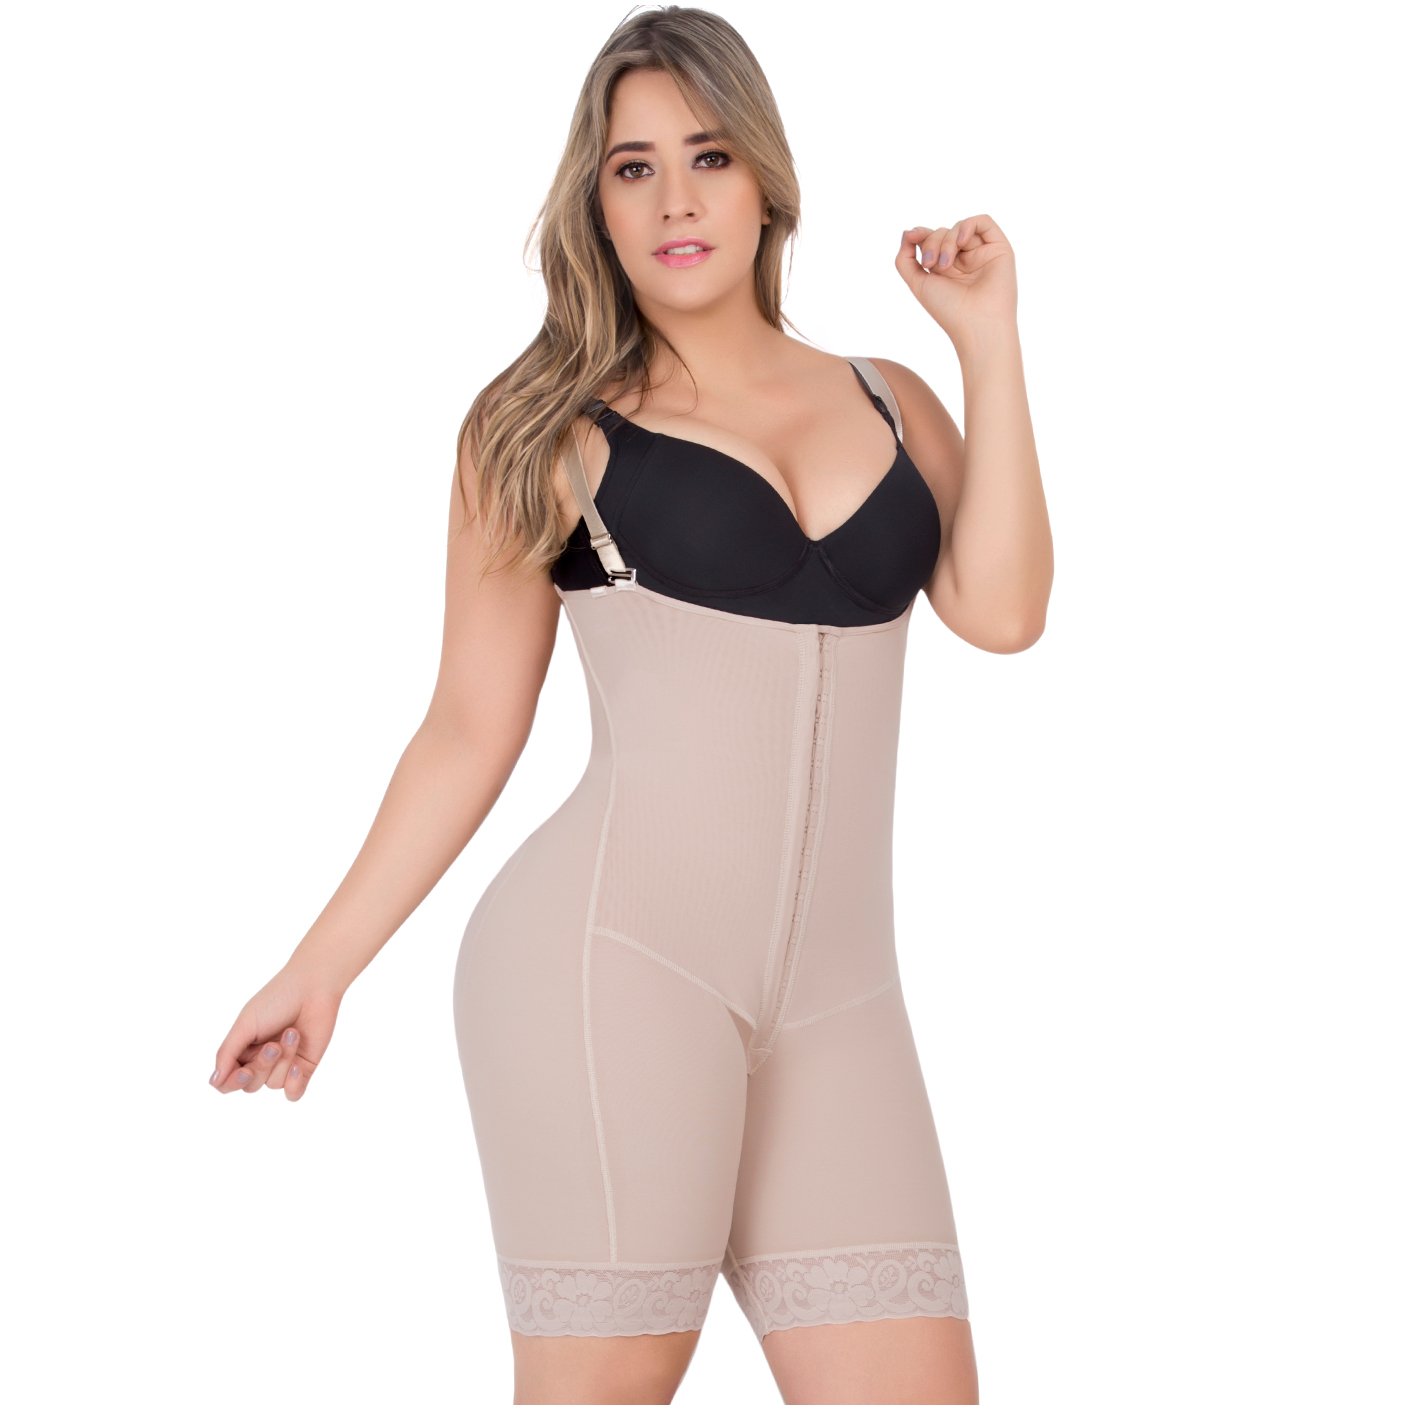 8532 o 8542 UP LADY Brassier 🇨🇴 push up extra firm, high compression, –  Fajas Kataleya